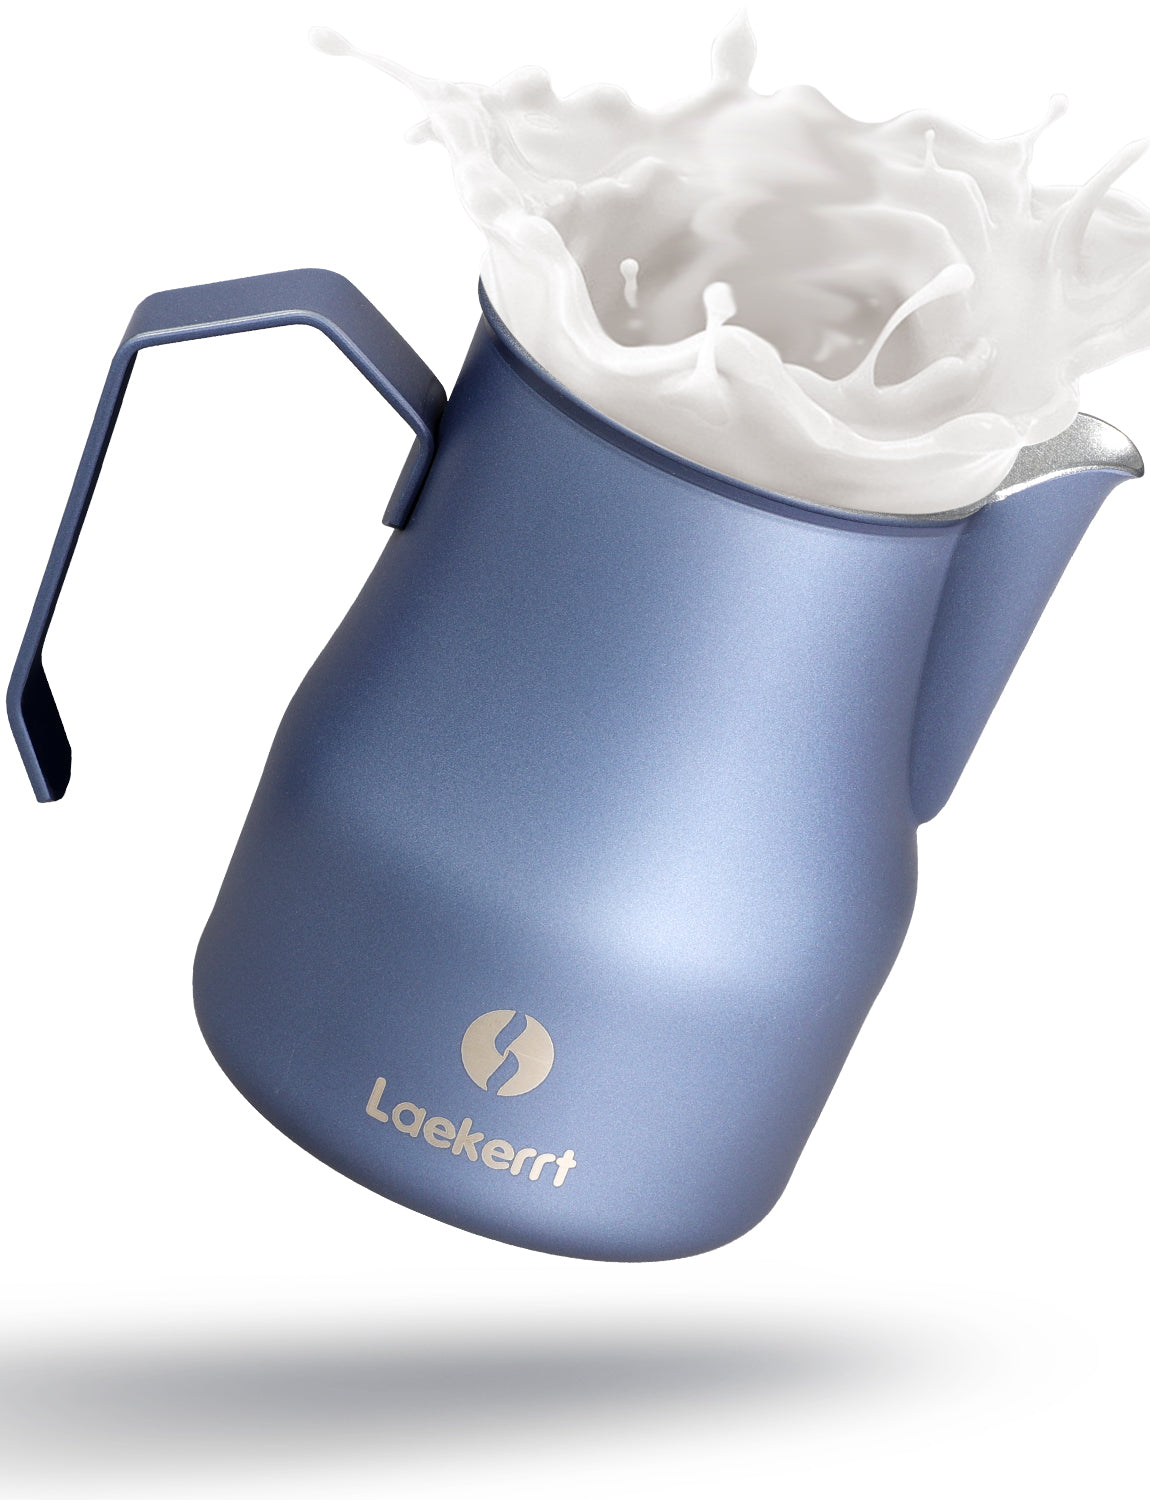 Laekerrt Milk Frothing Pitcher, Stainless Steel Coffee Tools Cup, Milk